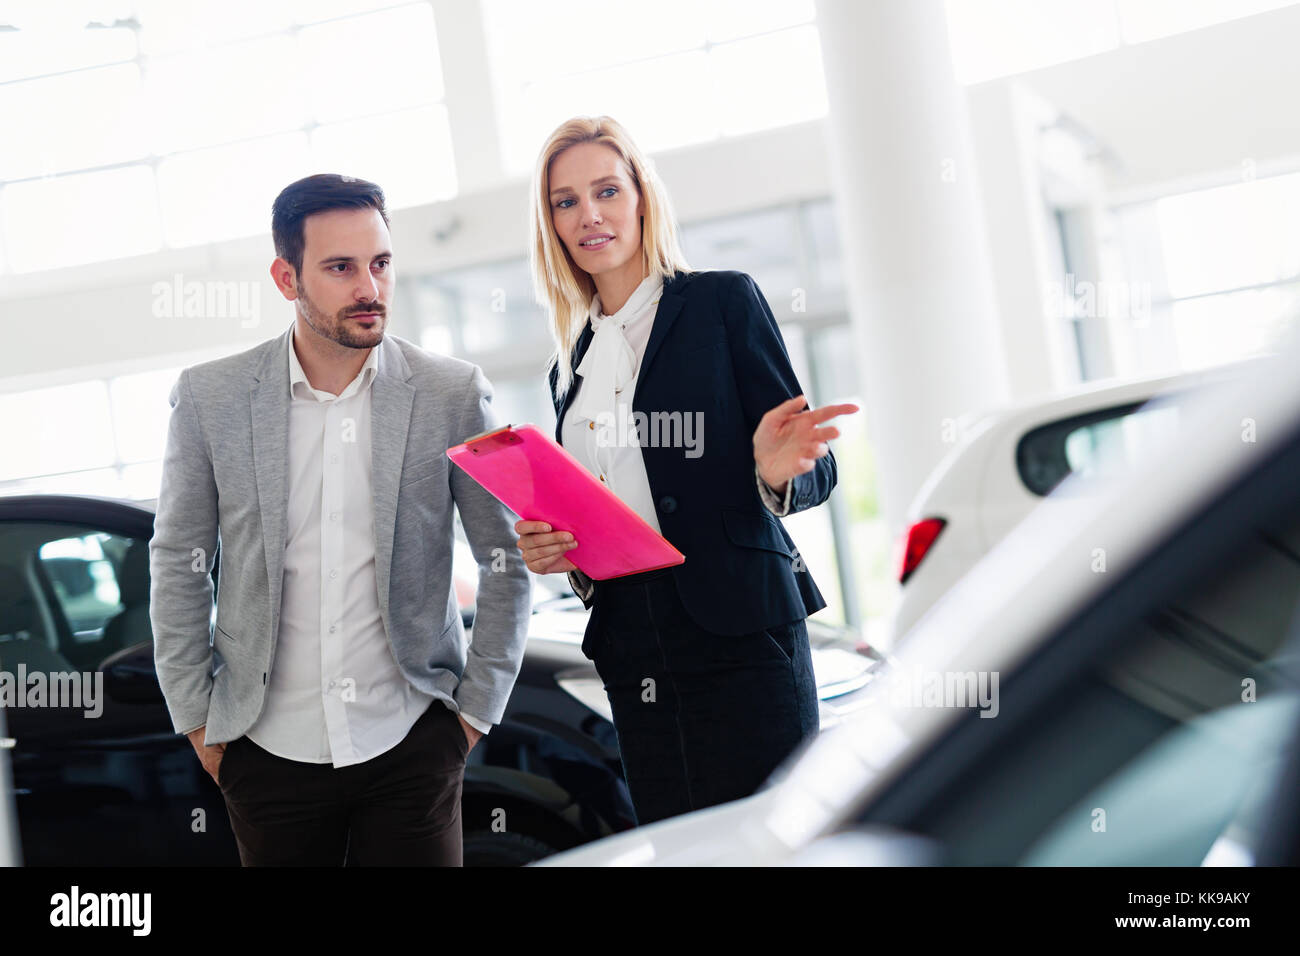 Professional salesperson selling cars at dealership to buyer Stock Photo